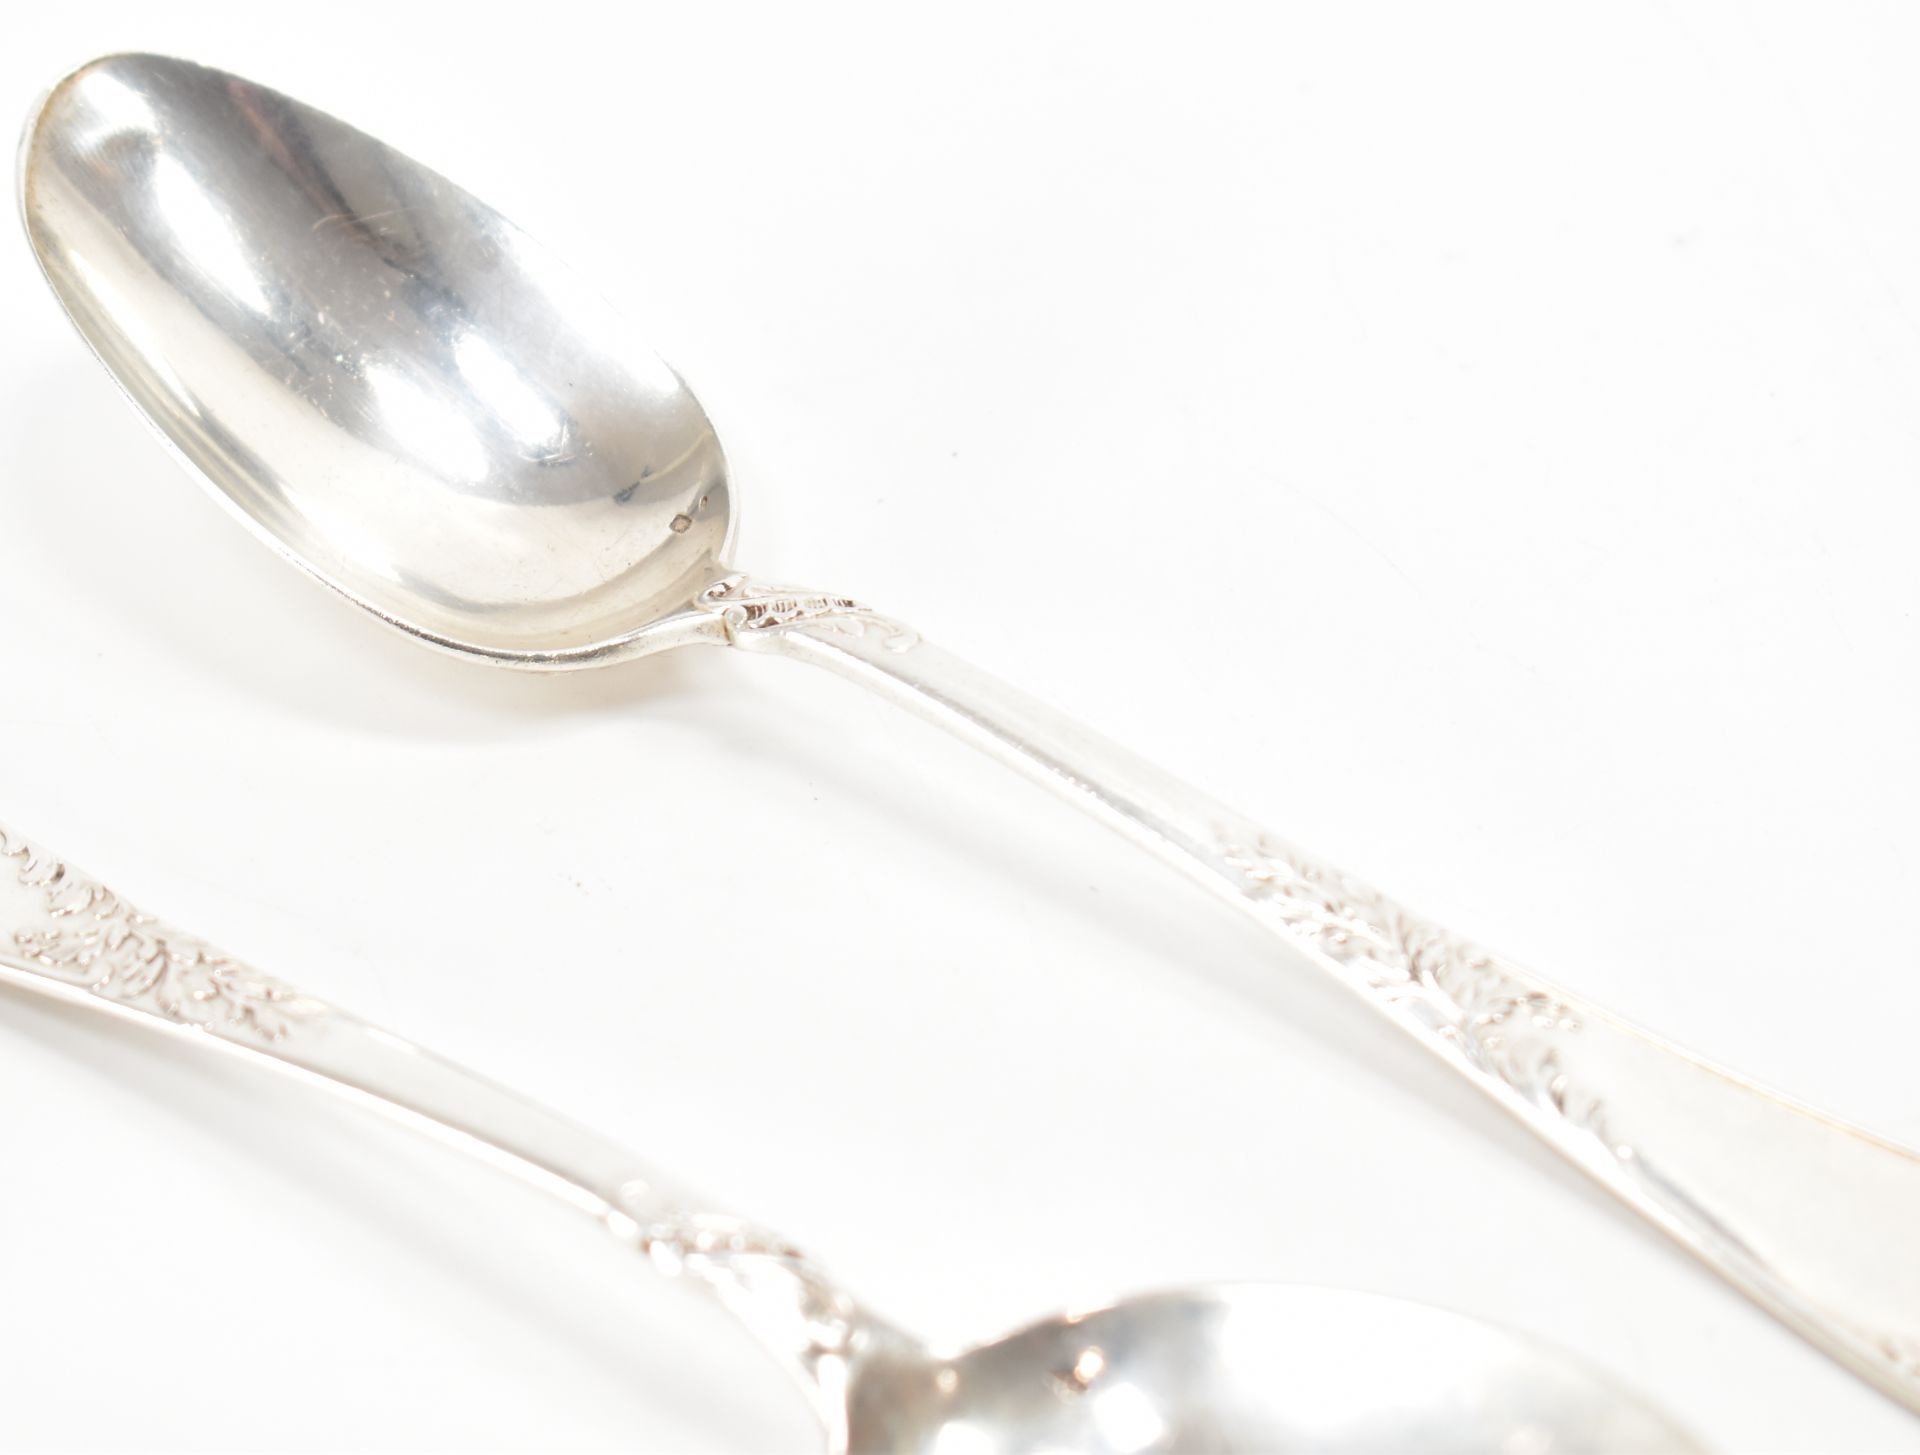 THREE ANTIQUE SILVER WHITE METAL SERVING SPOONS - Image 3 of 6